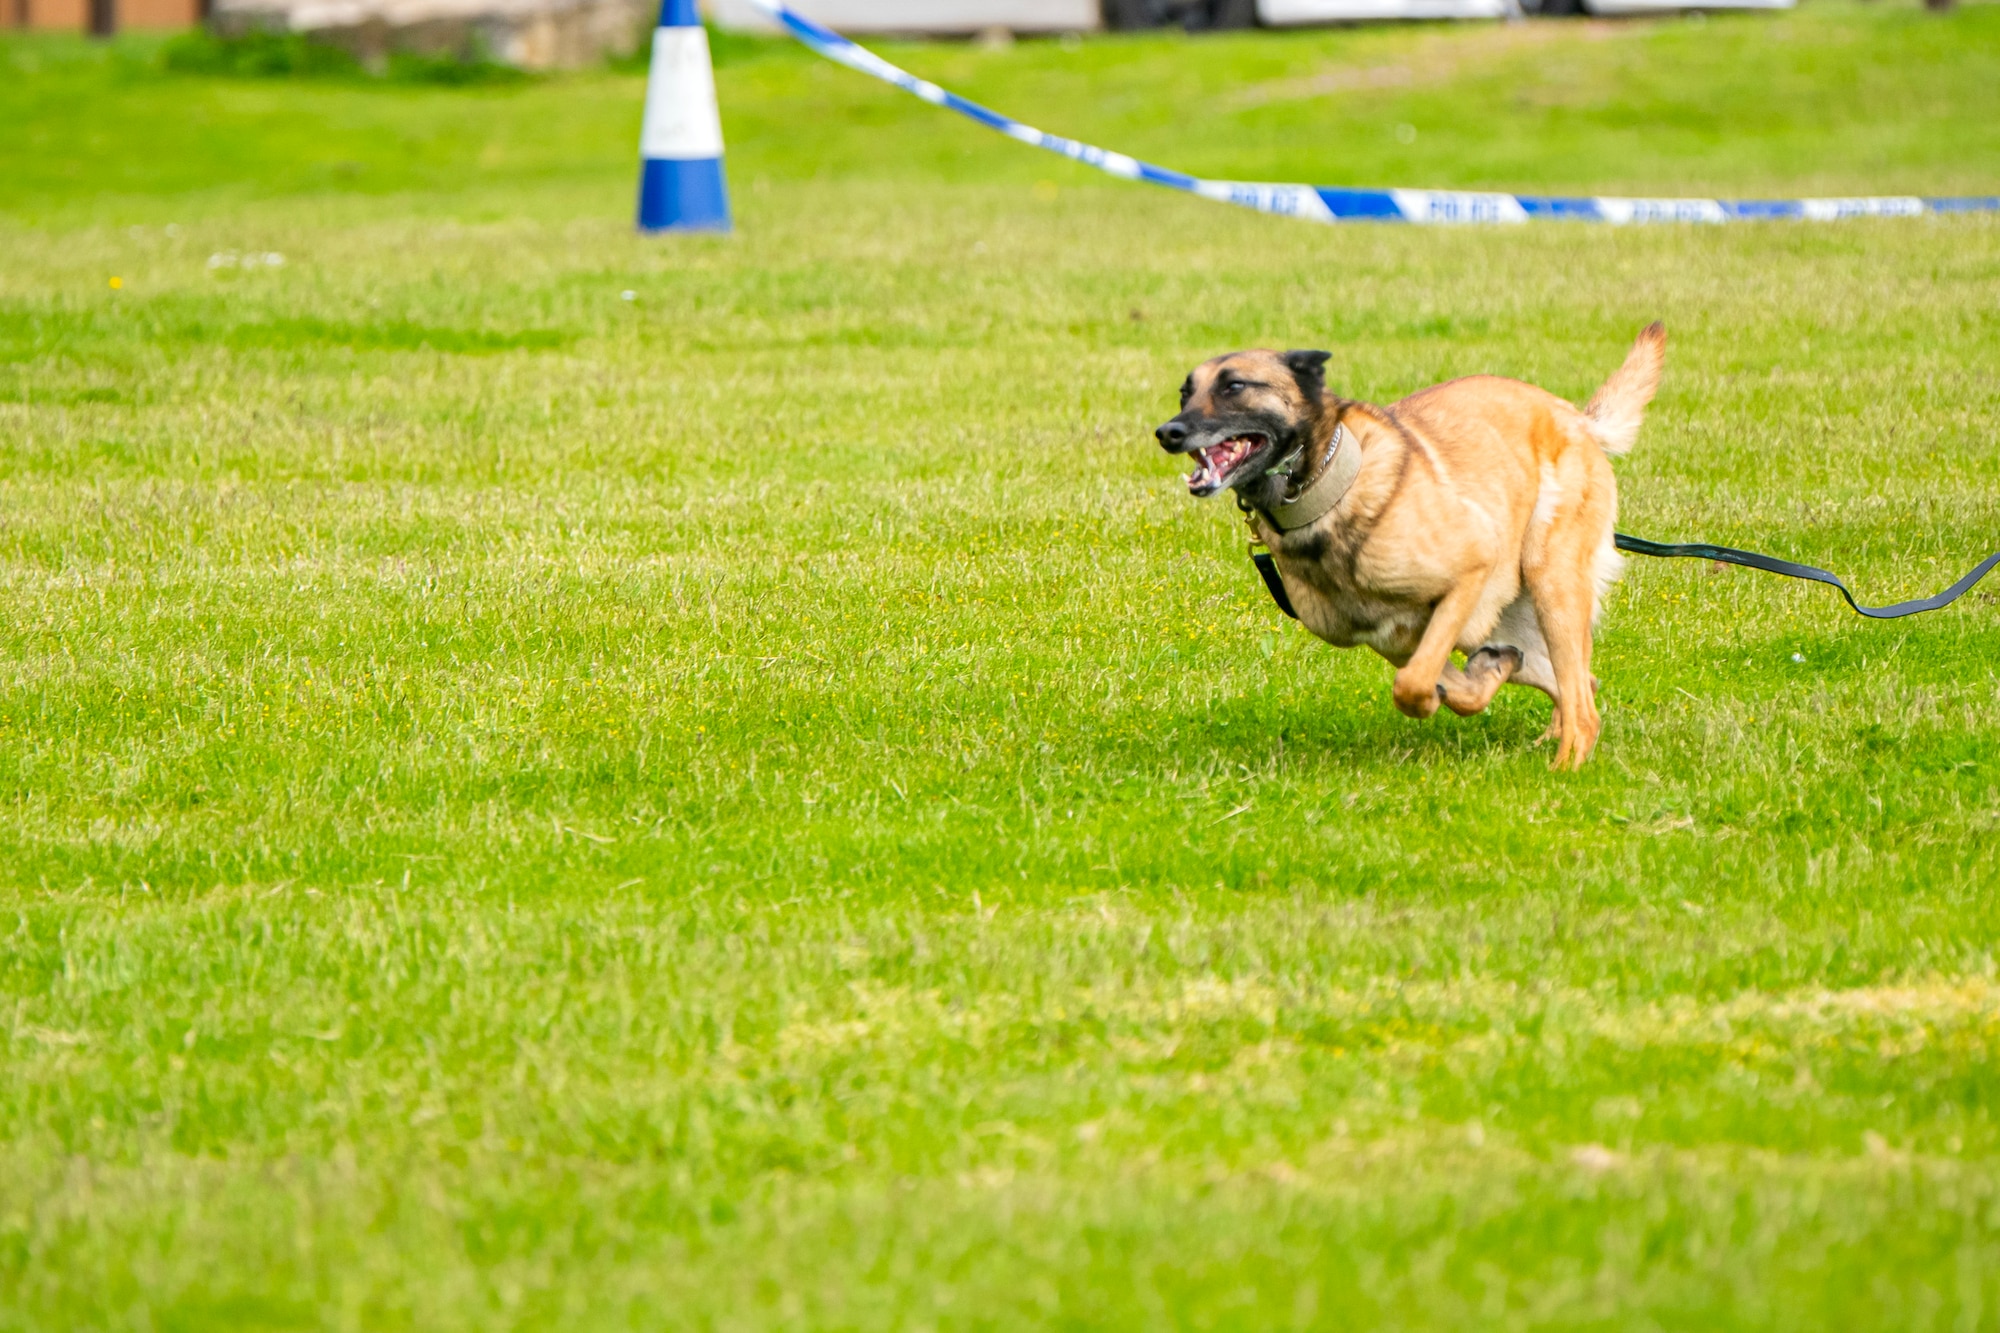 Military Working Dog Uta pursues a simulated suspect during a demonstration at RAF Alconbury, England, May 18, 2023. The demonstration was a part of National Police Week where members from SFS engaged with and demonstrated police capabilities to students from Alconbury Elementary school. (U.S. Air Force photo by Staff Sgt. Eugene Oliver)